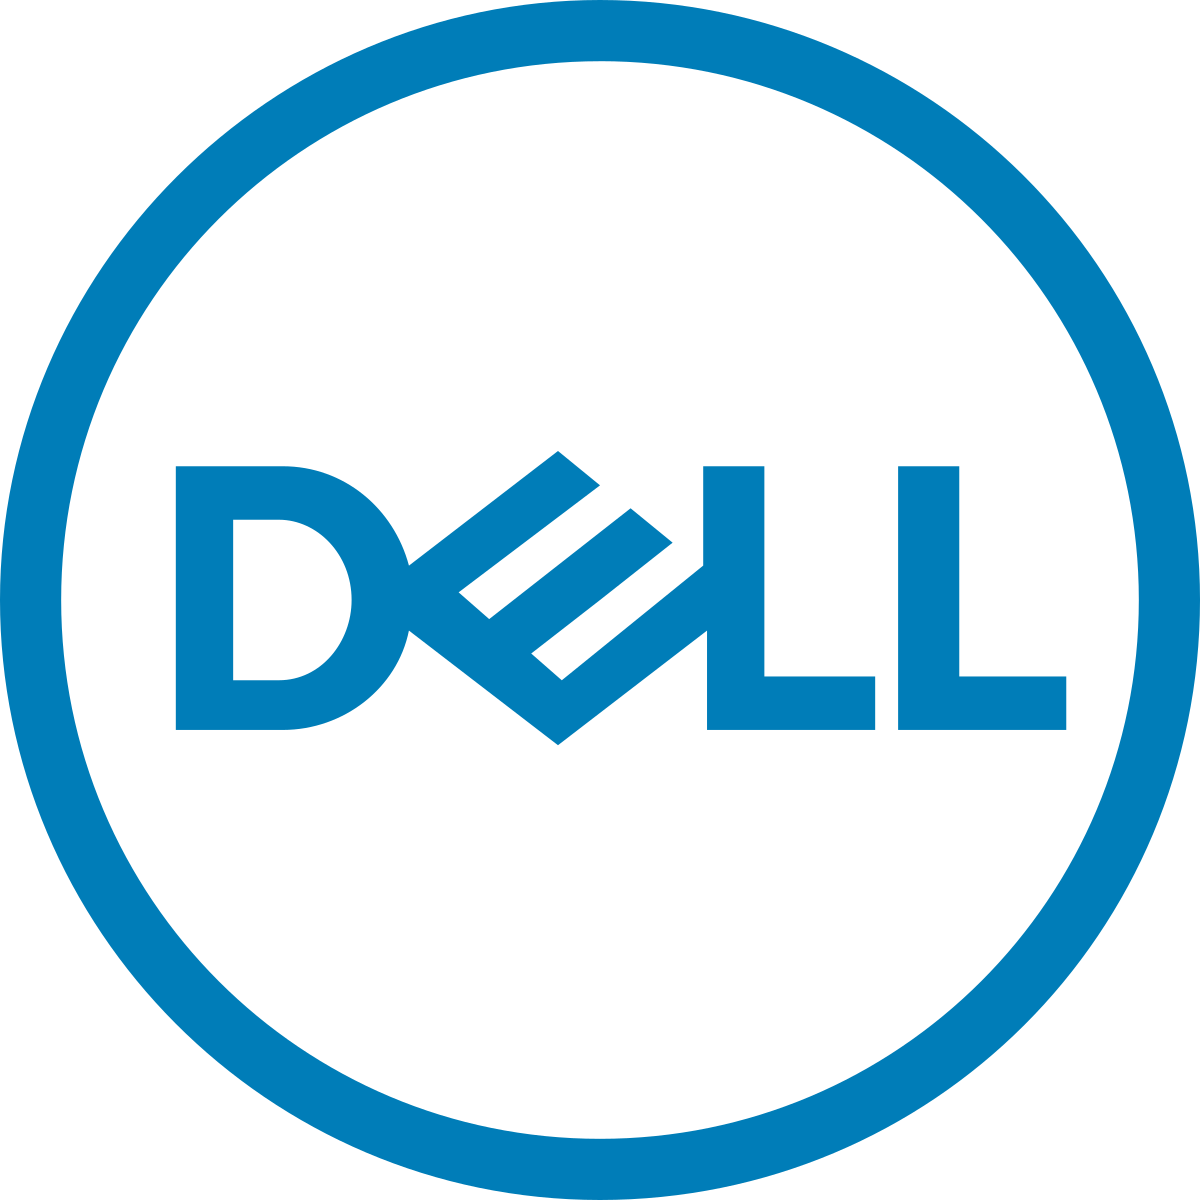 Dell Logo: Recognizable emblem of the Dell brand